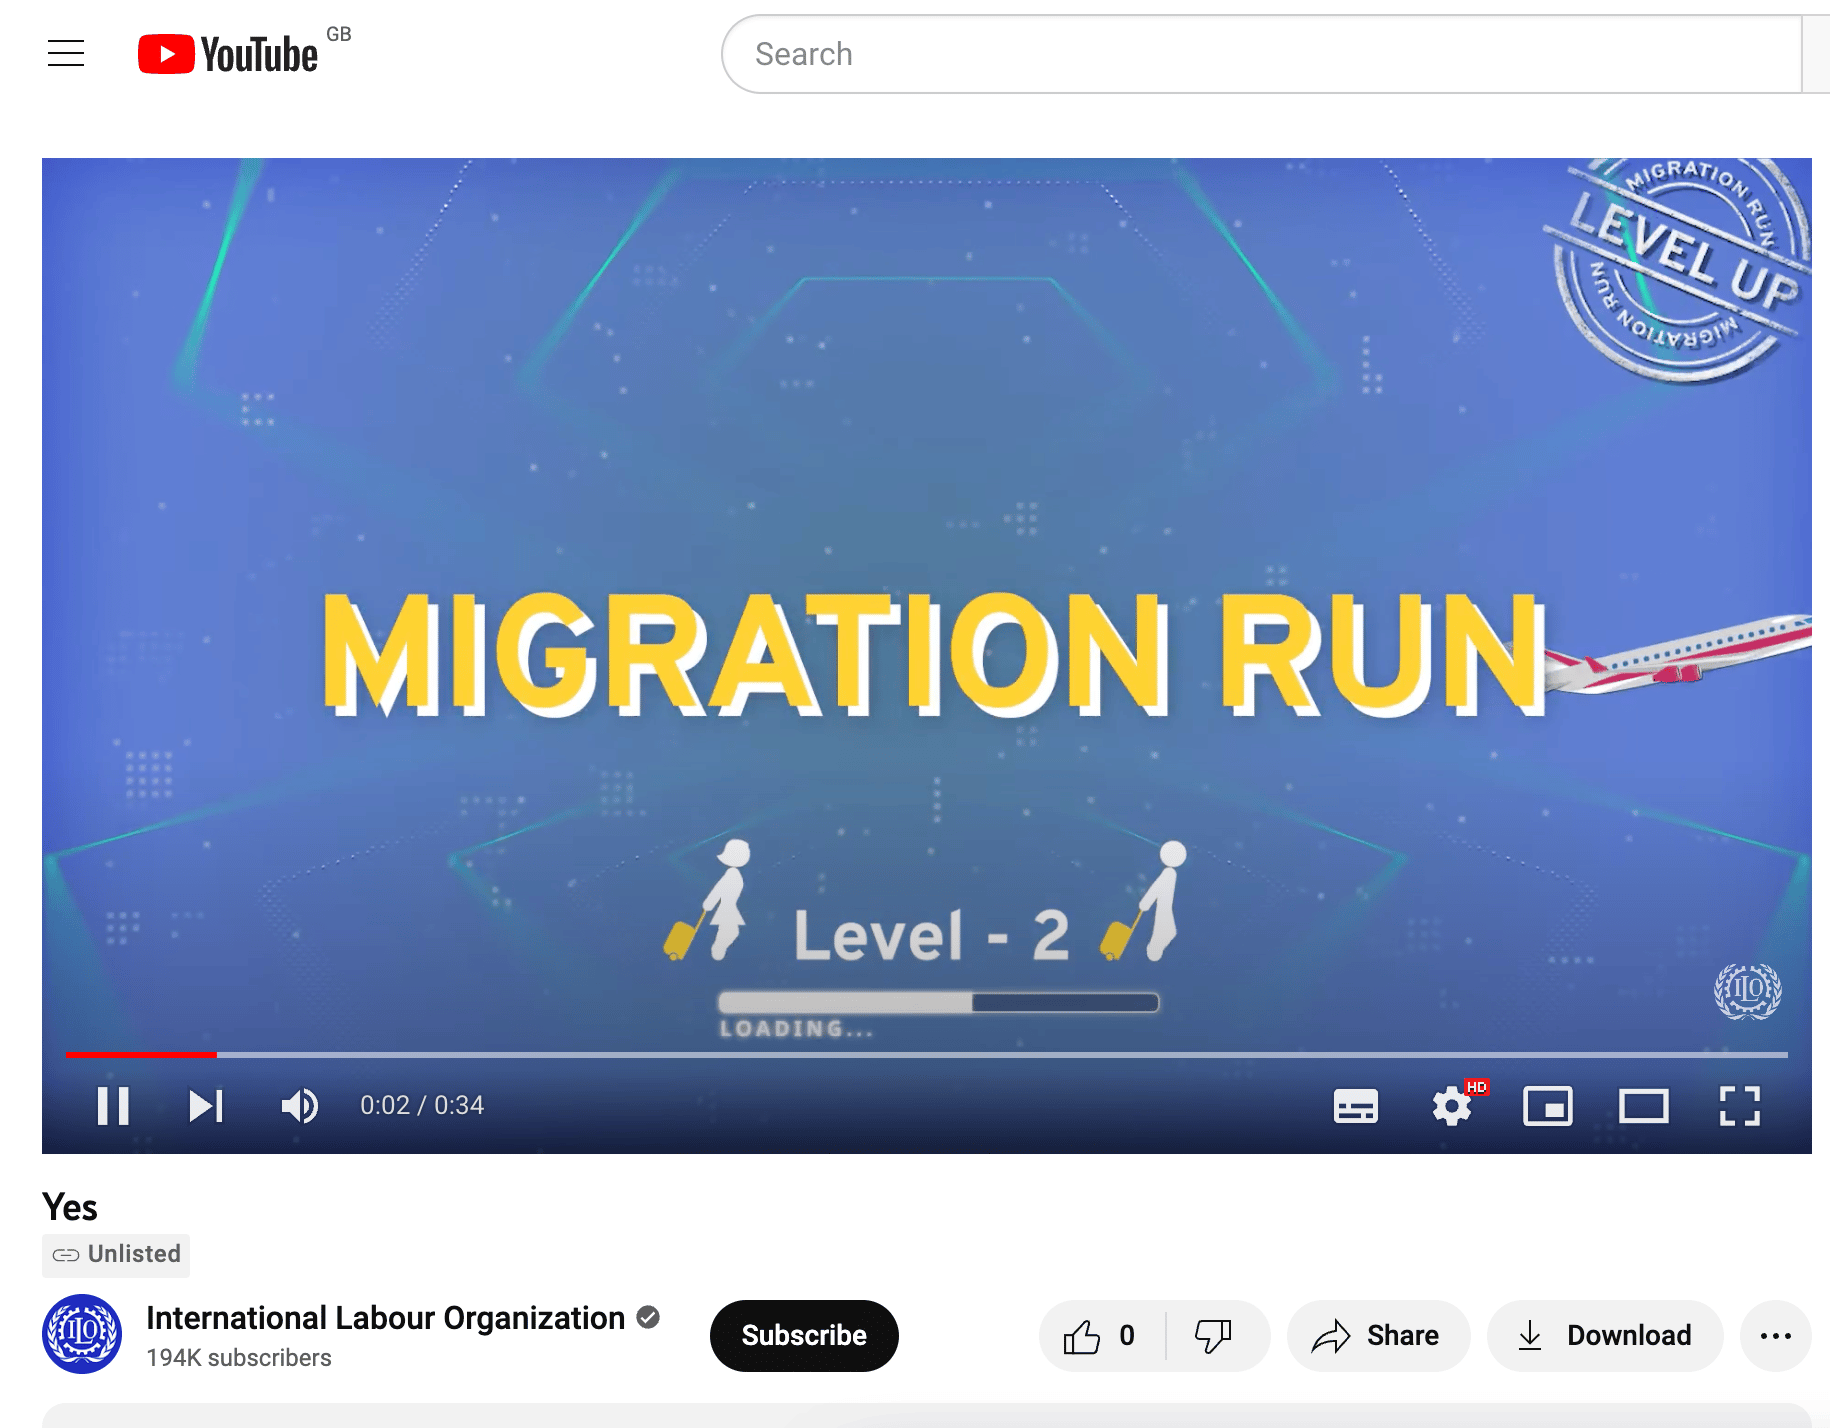 A Screenshot from YouTube - Migration Run is playing, the second video has just begun - Level 2. A blue background, with the words "migration run" in yellow text. Underneath the text, is an animation of a loading bar and two white silhouettes pulling suitcases.